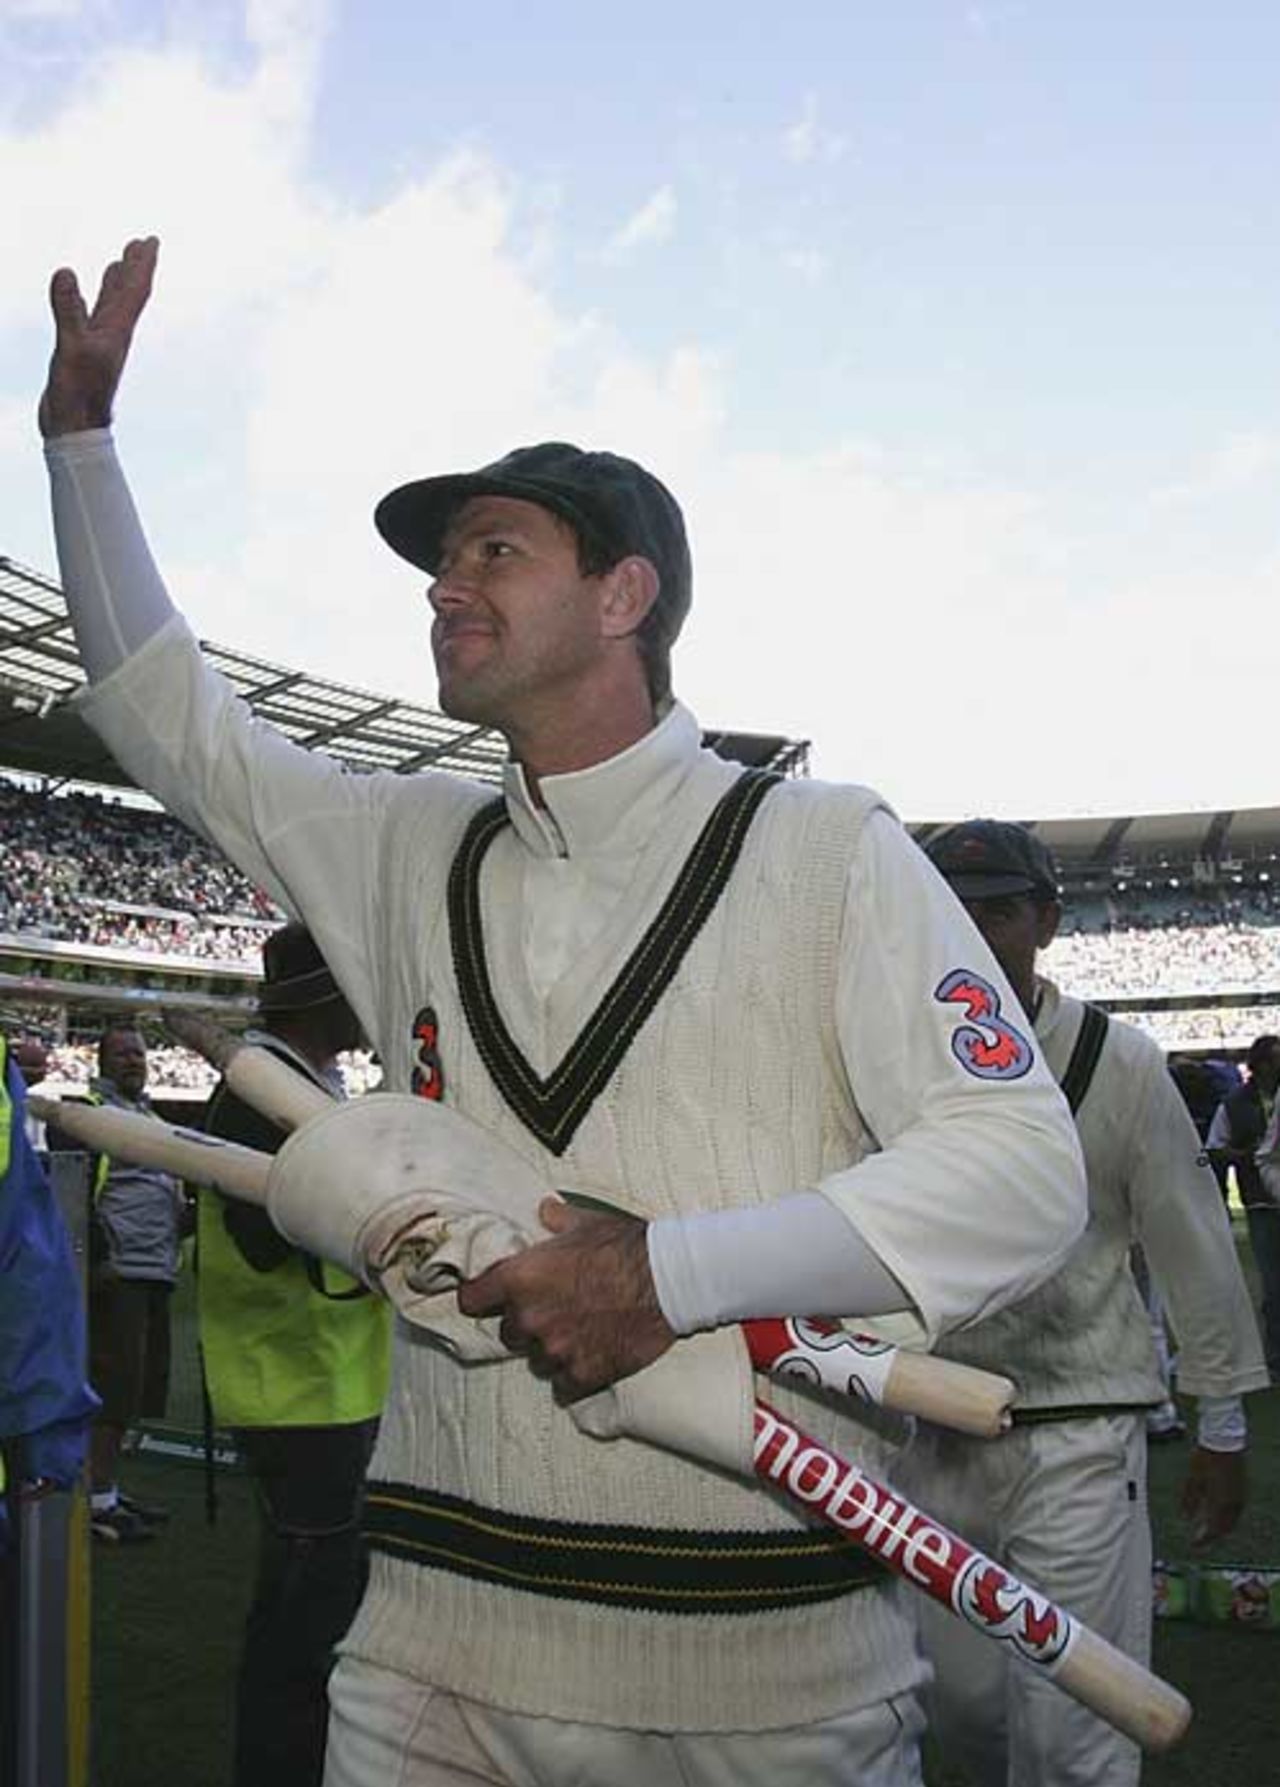 Ricky Ponting waves to the Australian supporters, Australia v England, 4th Test, Melbourne, December 28, 2006